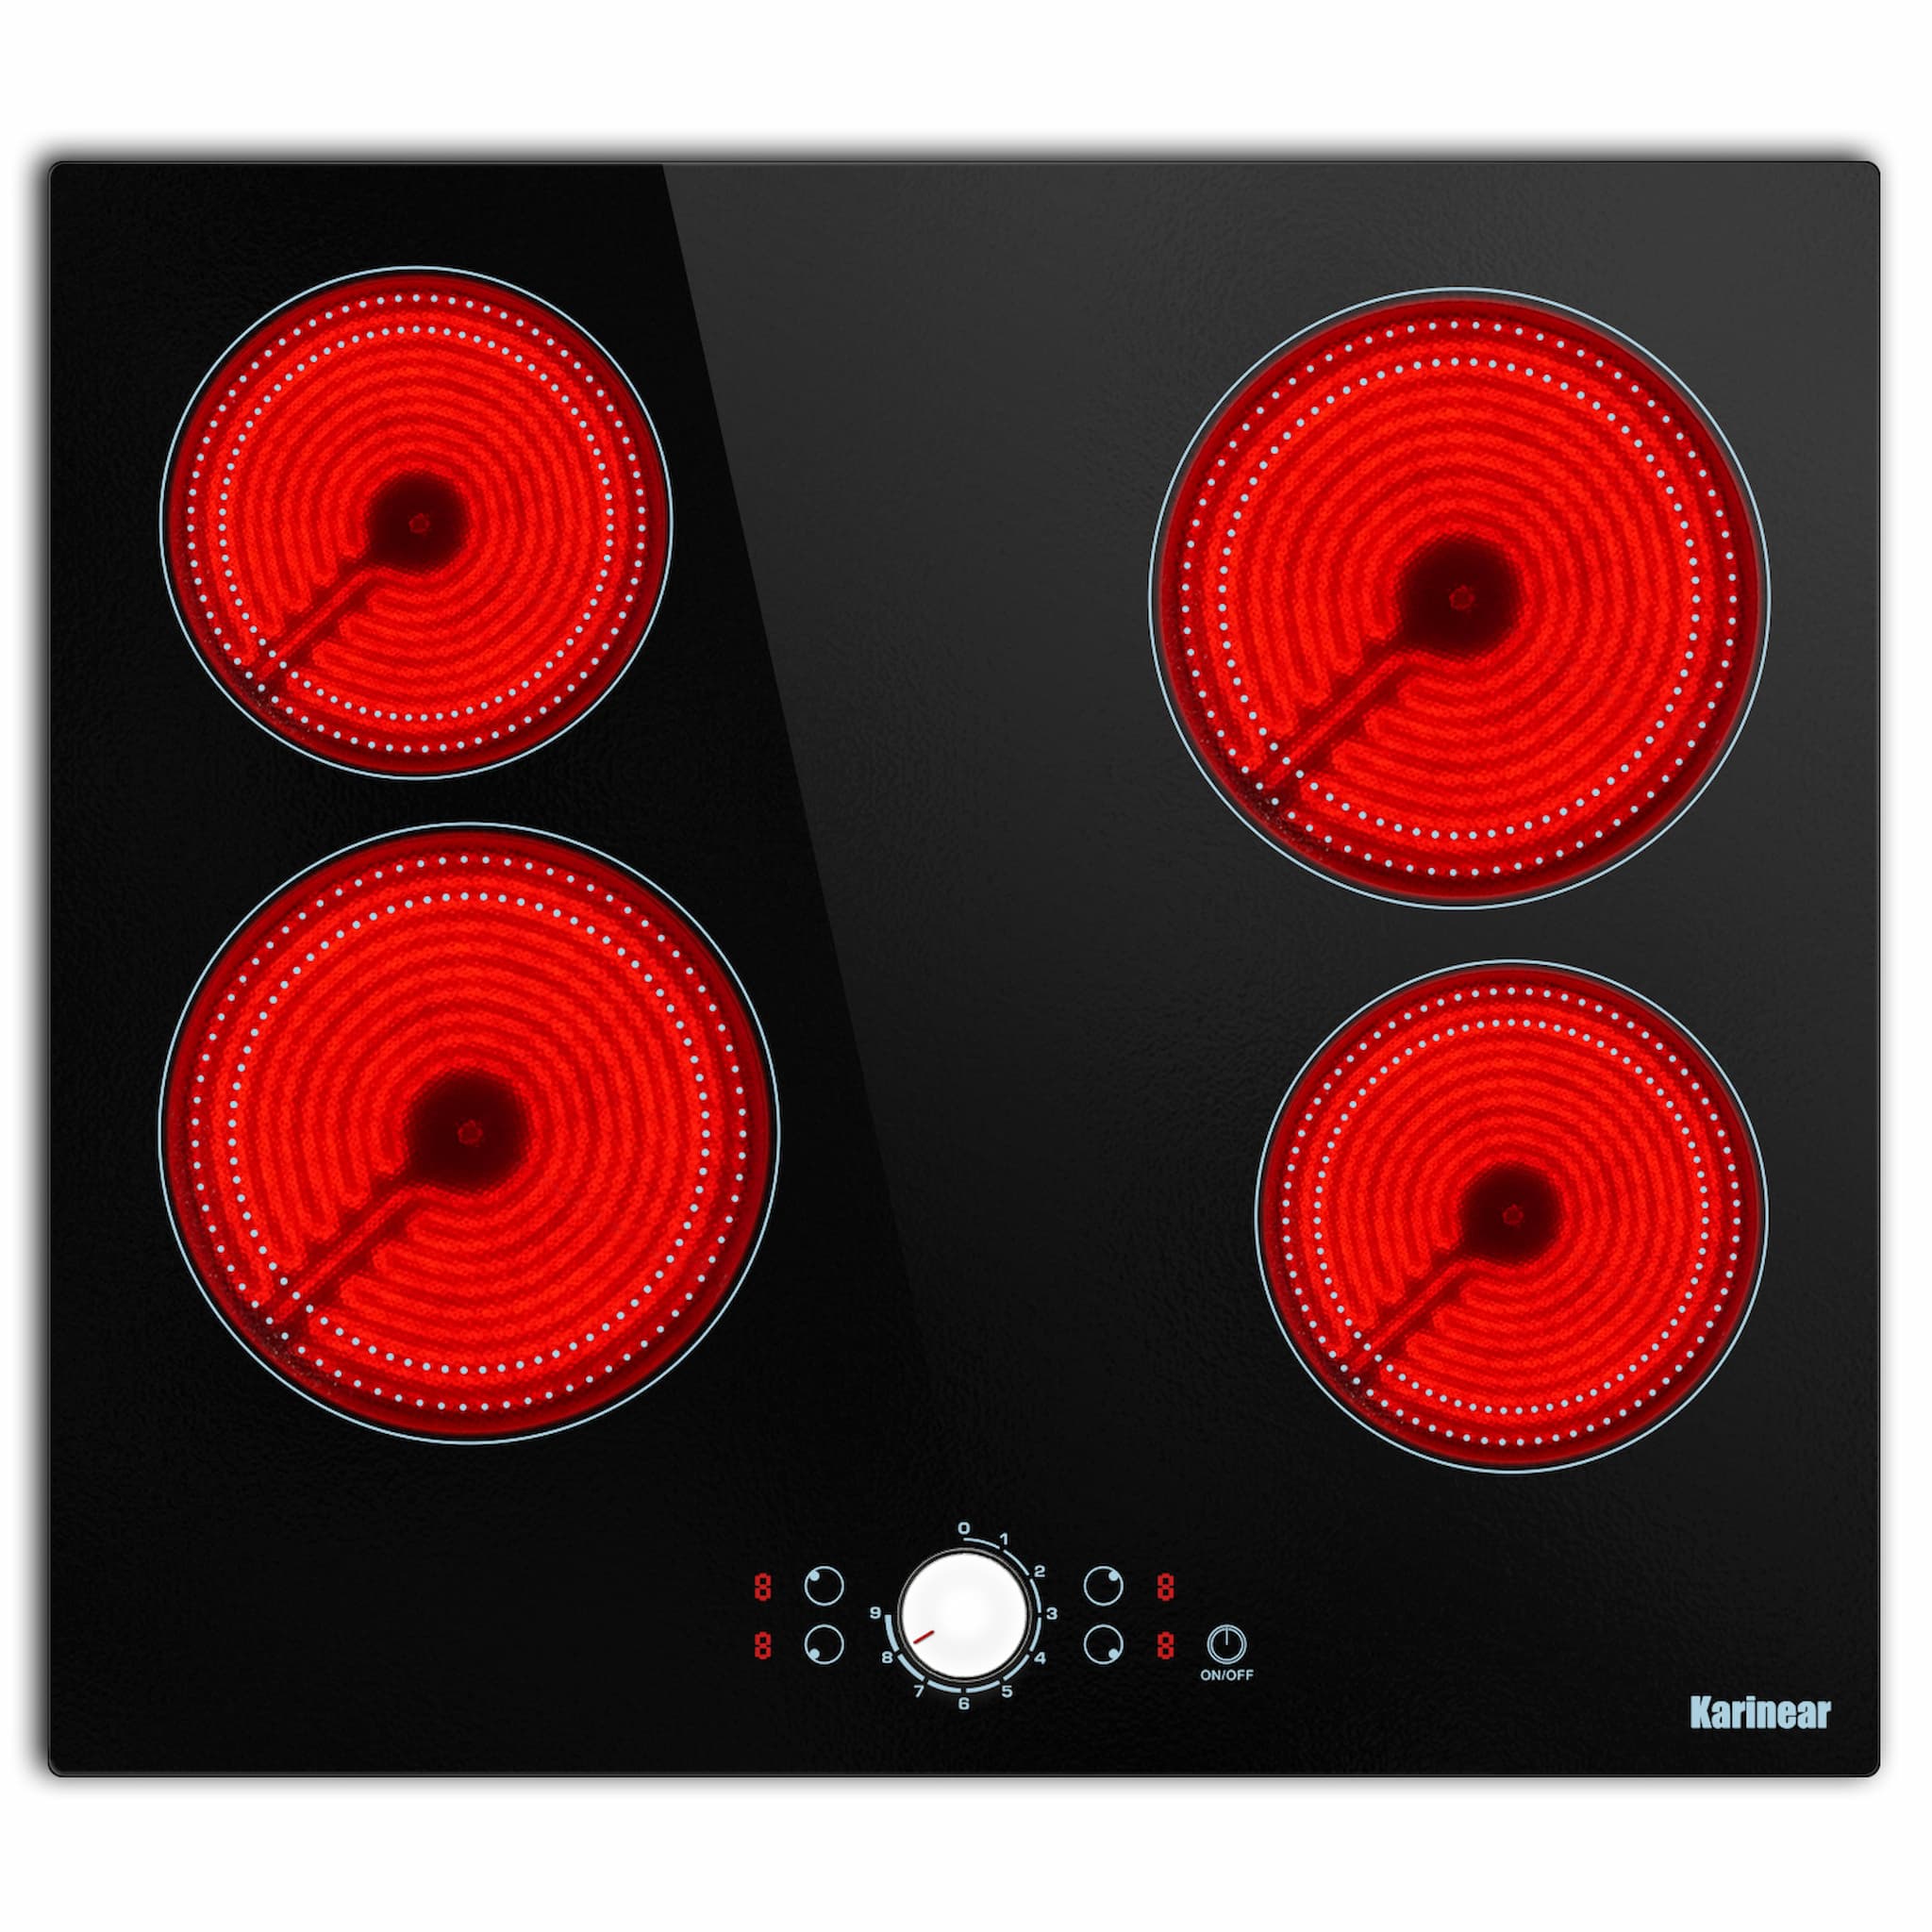 Karinear 24 Inch Electric Cooktop 4 Burners Electric Stove Top, 220-240v Built-in Electric Ceramic Cooktop with Knob Control,9 Power Levels, Black Glass,No Plug